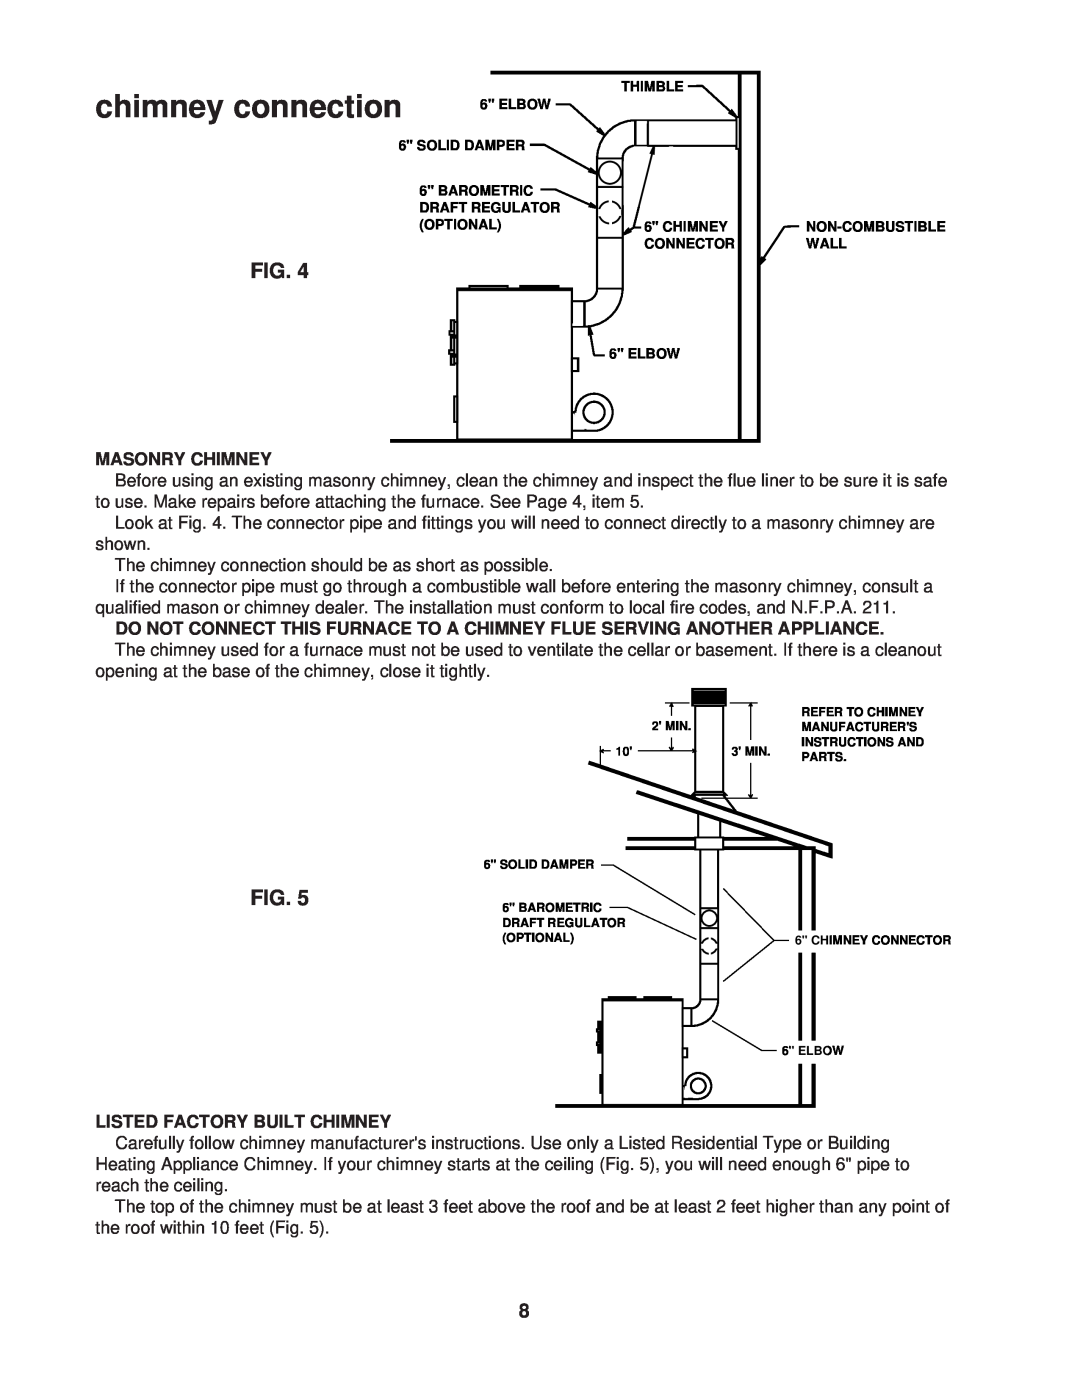 United States Stove 1537Q owner manual chimney connection, Masonry Chimney, Listed Factory Built Chimney 